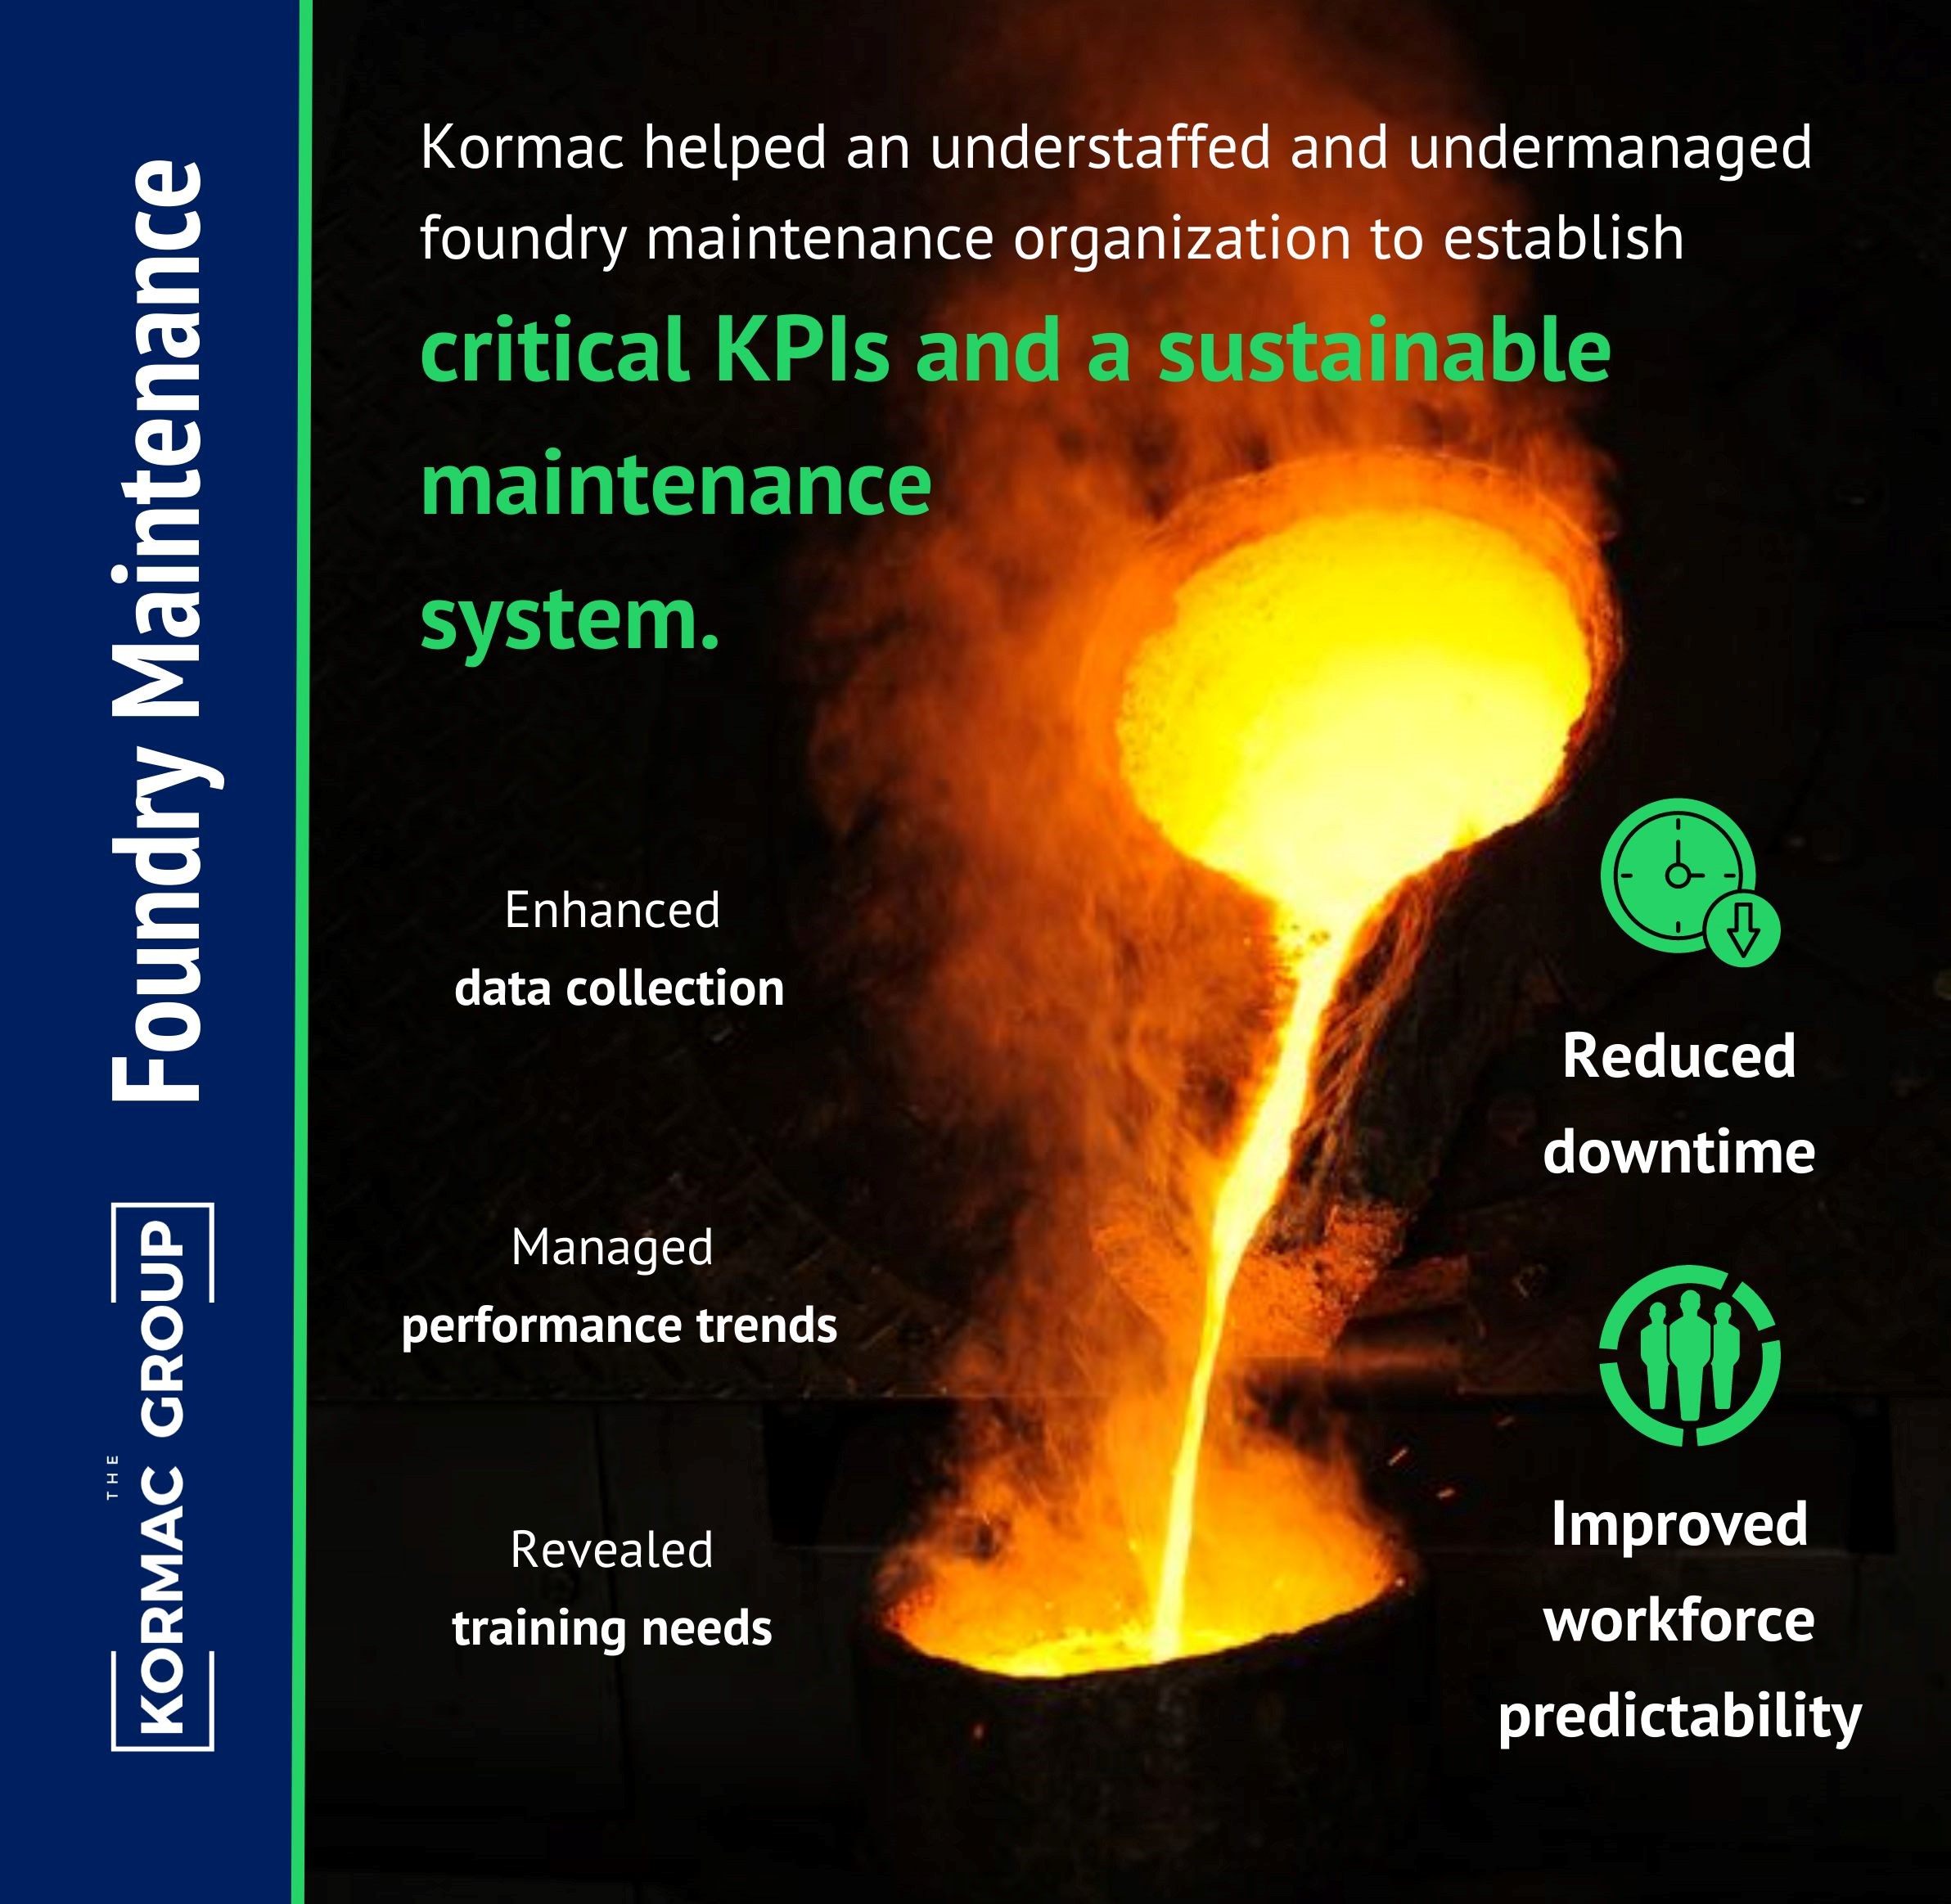 Foundry Maintenance Kormac helped an understaffed and undermanaged foundry maintenance operation to establish critical KPIs and a sustainable maintenance system. - Enhanced data collection - Reduced downtime - Managed performance trends - Improved workforce predictability - Revealed training needs